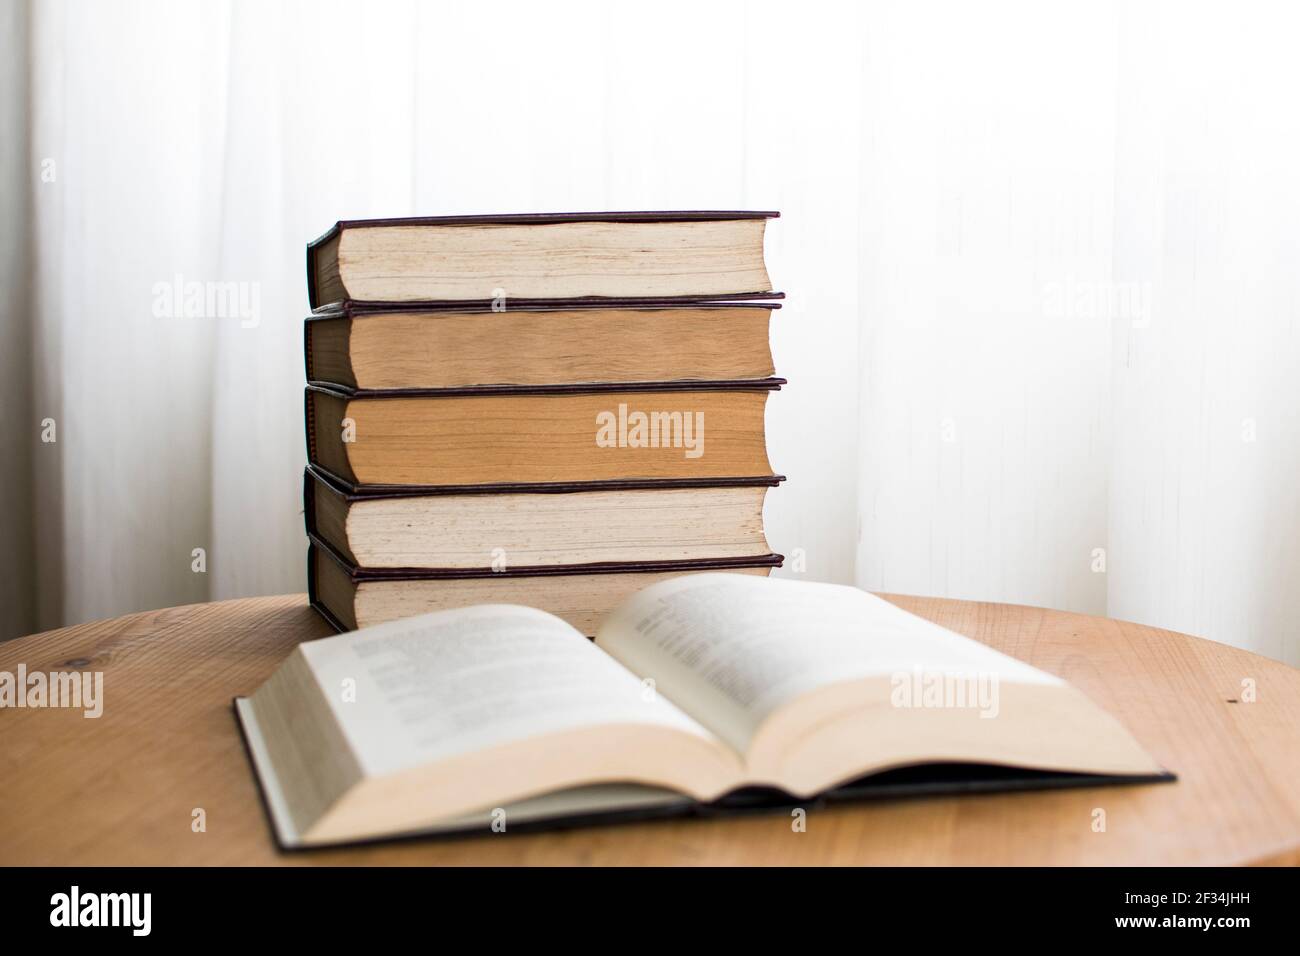 Hard cover books stacked on top of each other on top of a desk, studying material Stock Photo